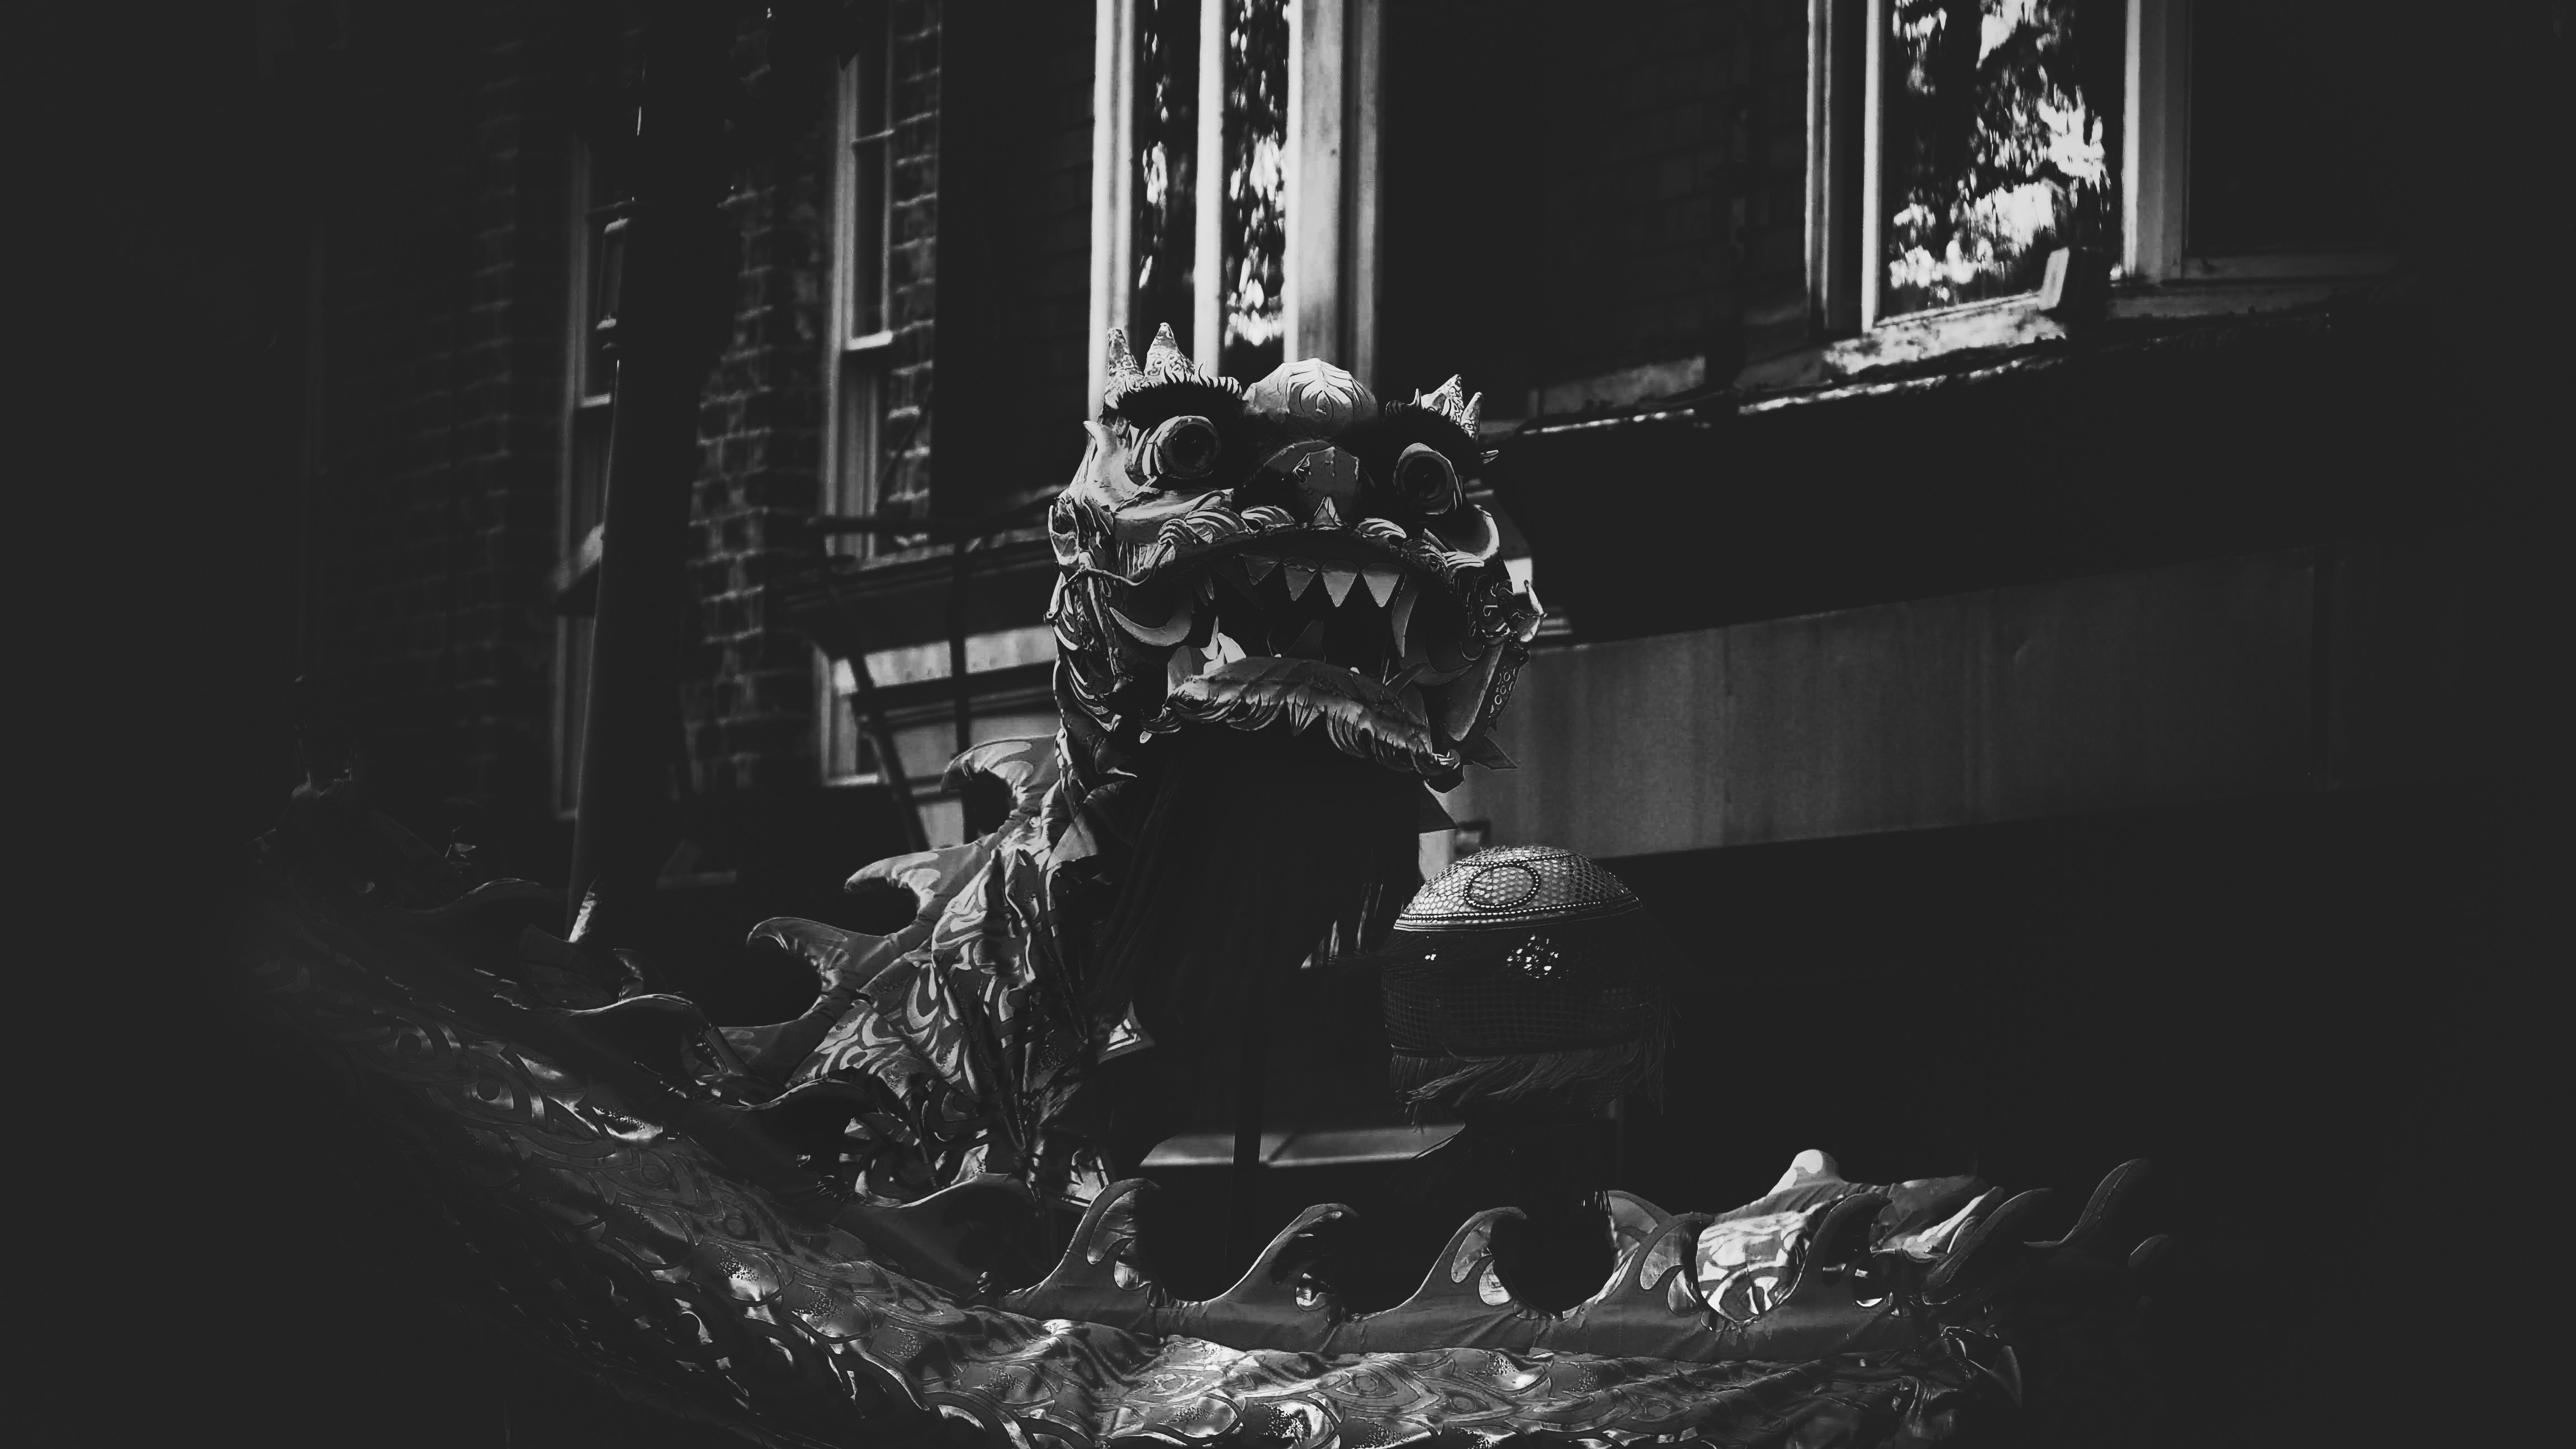 Face to face with a dragon in streets of Liverpool. Also thanks to the Unsplash slack community for helping me out and giving me a second opinion on a few things I should change!